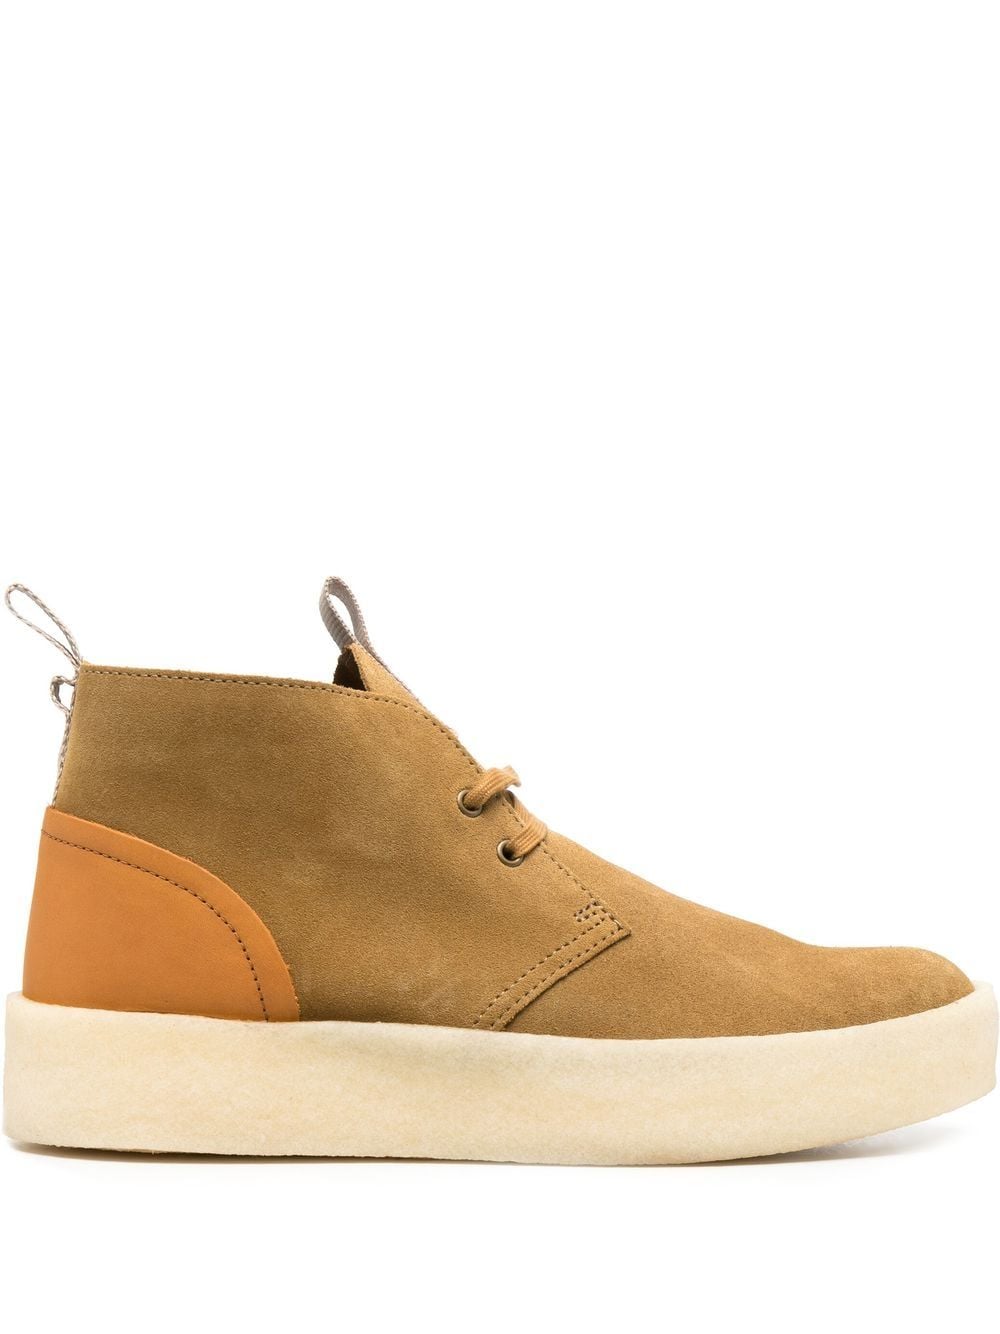 Desert Cup suede lace-up shoes